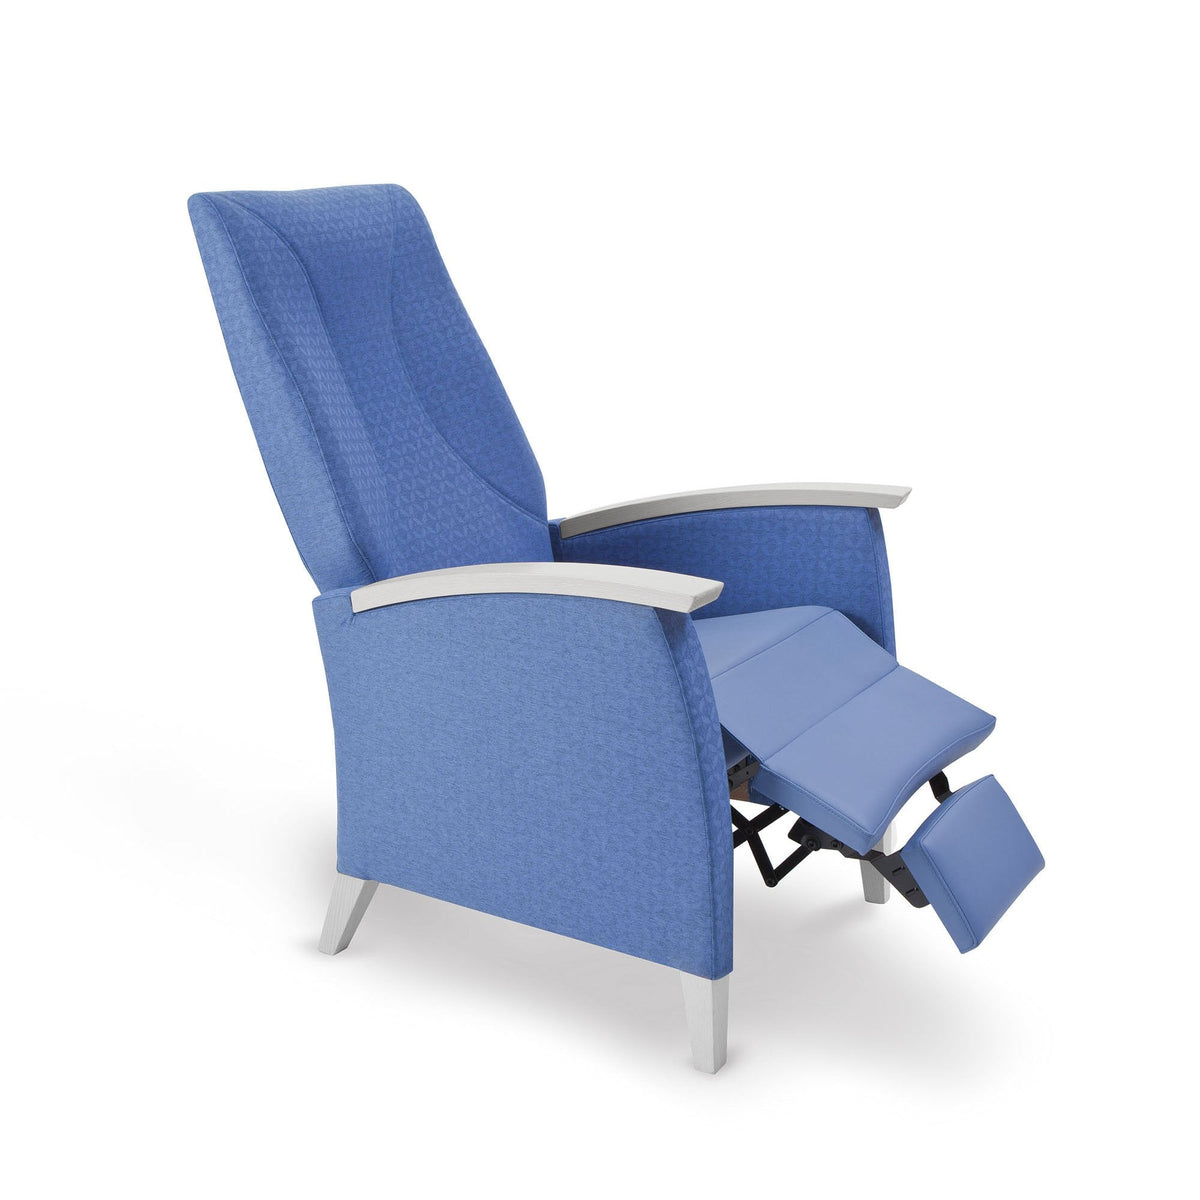 Fandango 79-63/3RPG Lounge Chair-Piaval-Contract Furniture Store